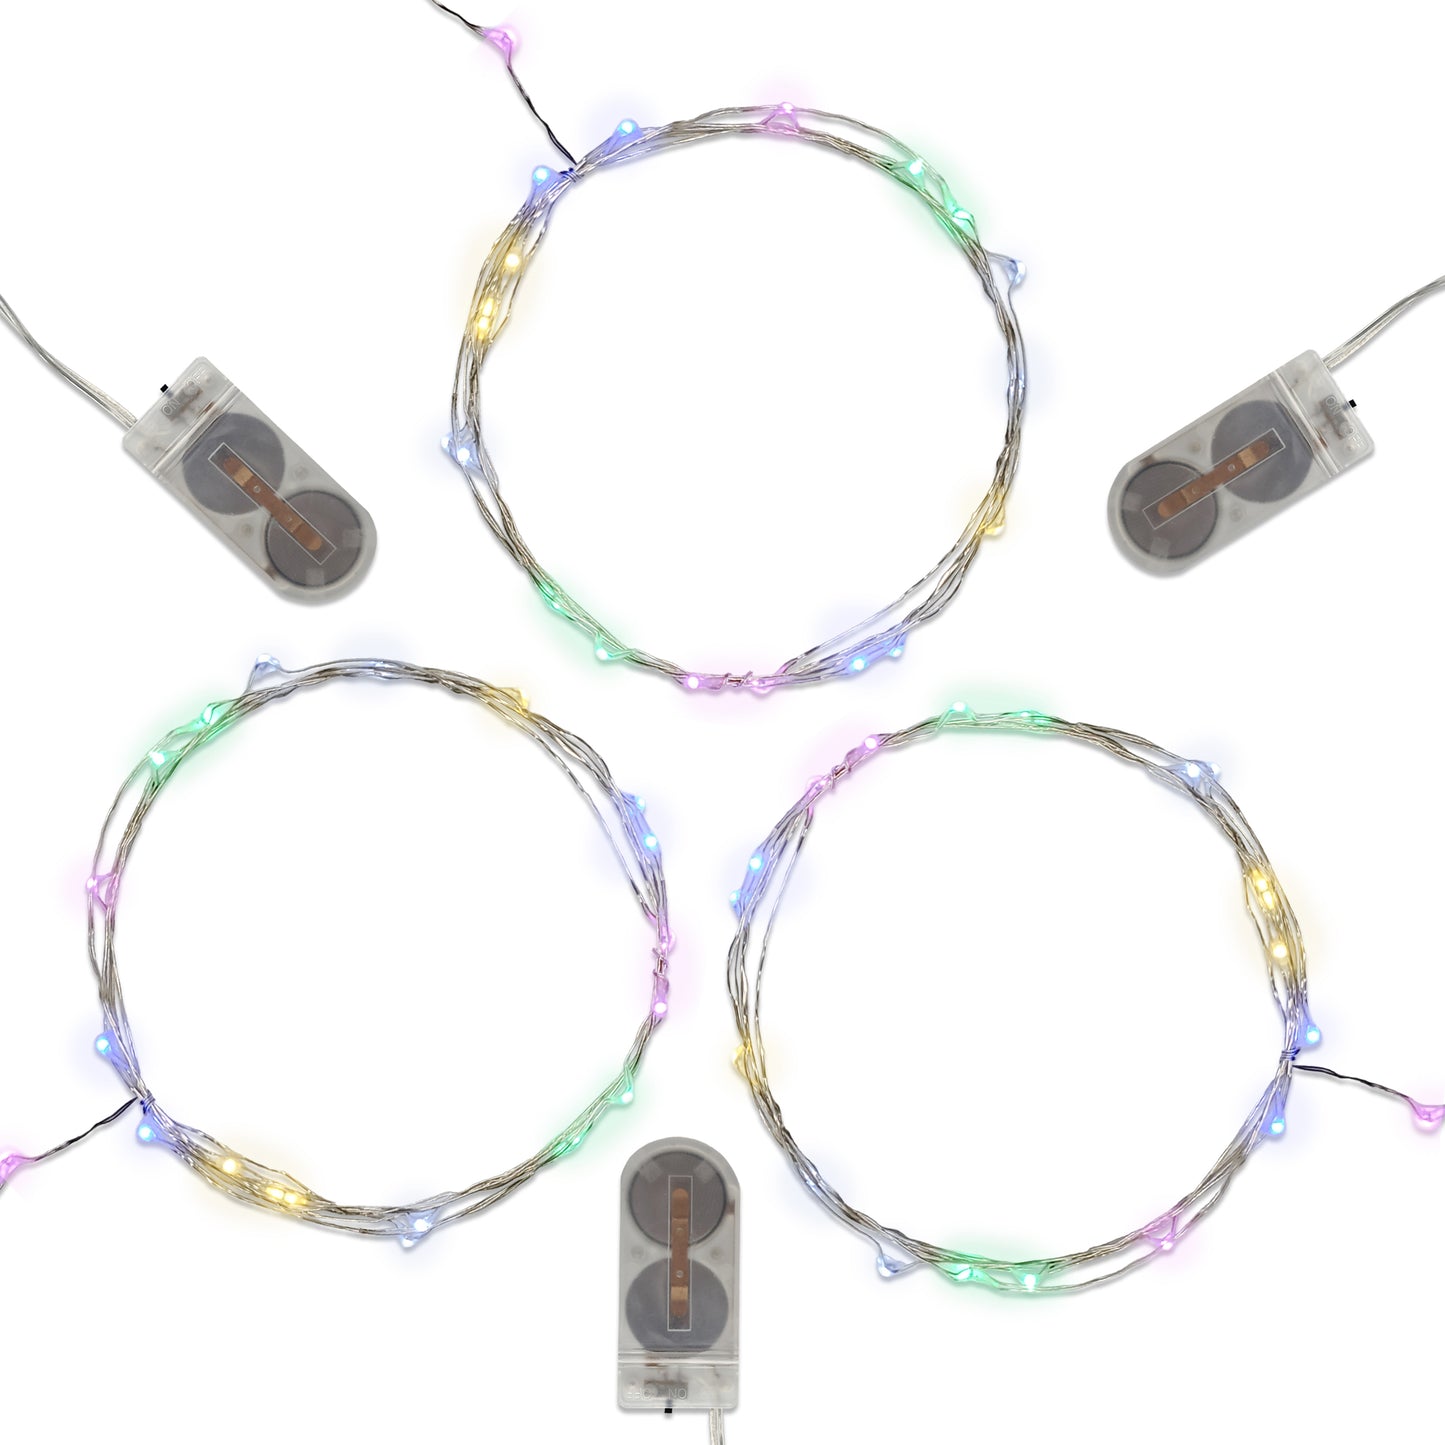 Battery Operated LED Fairy String Lights- Set of 3 - Multi Color